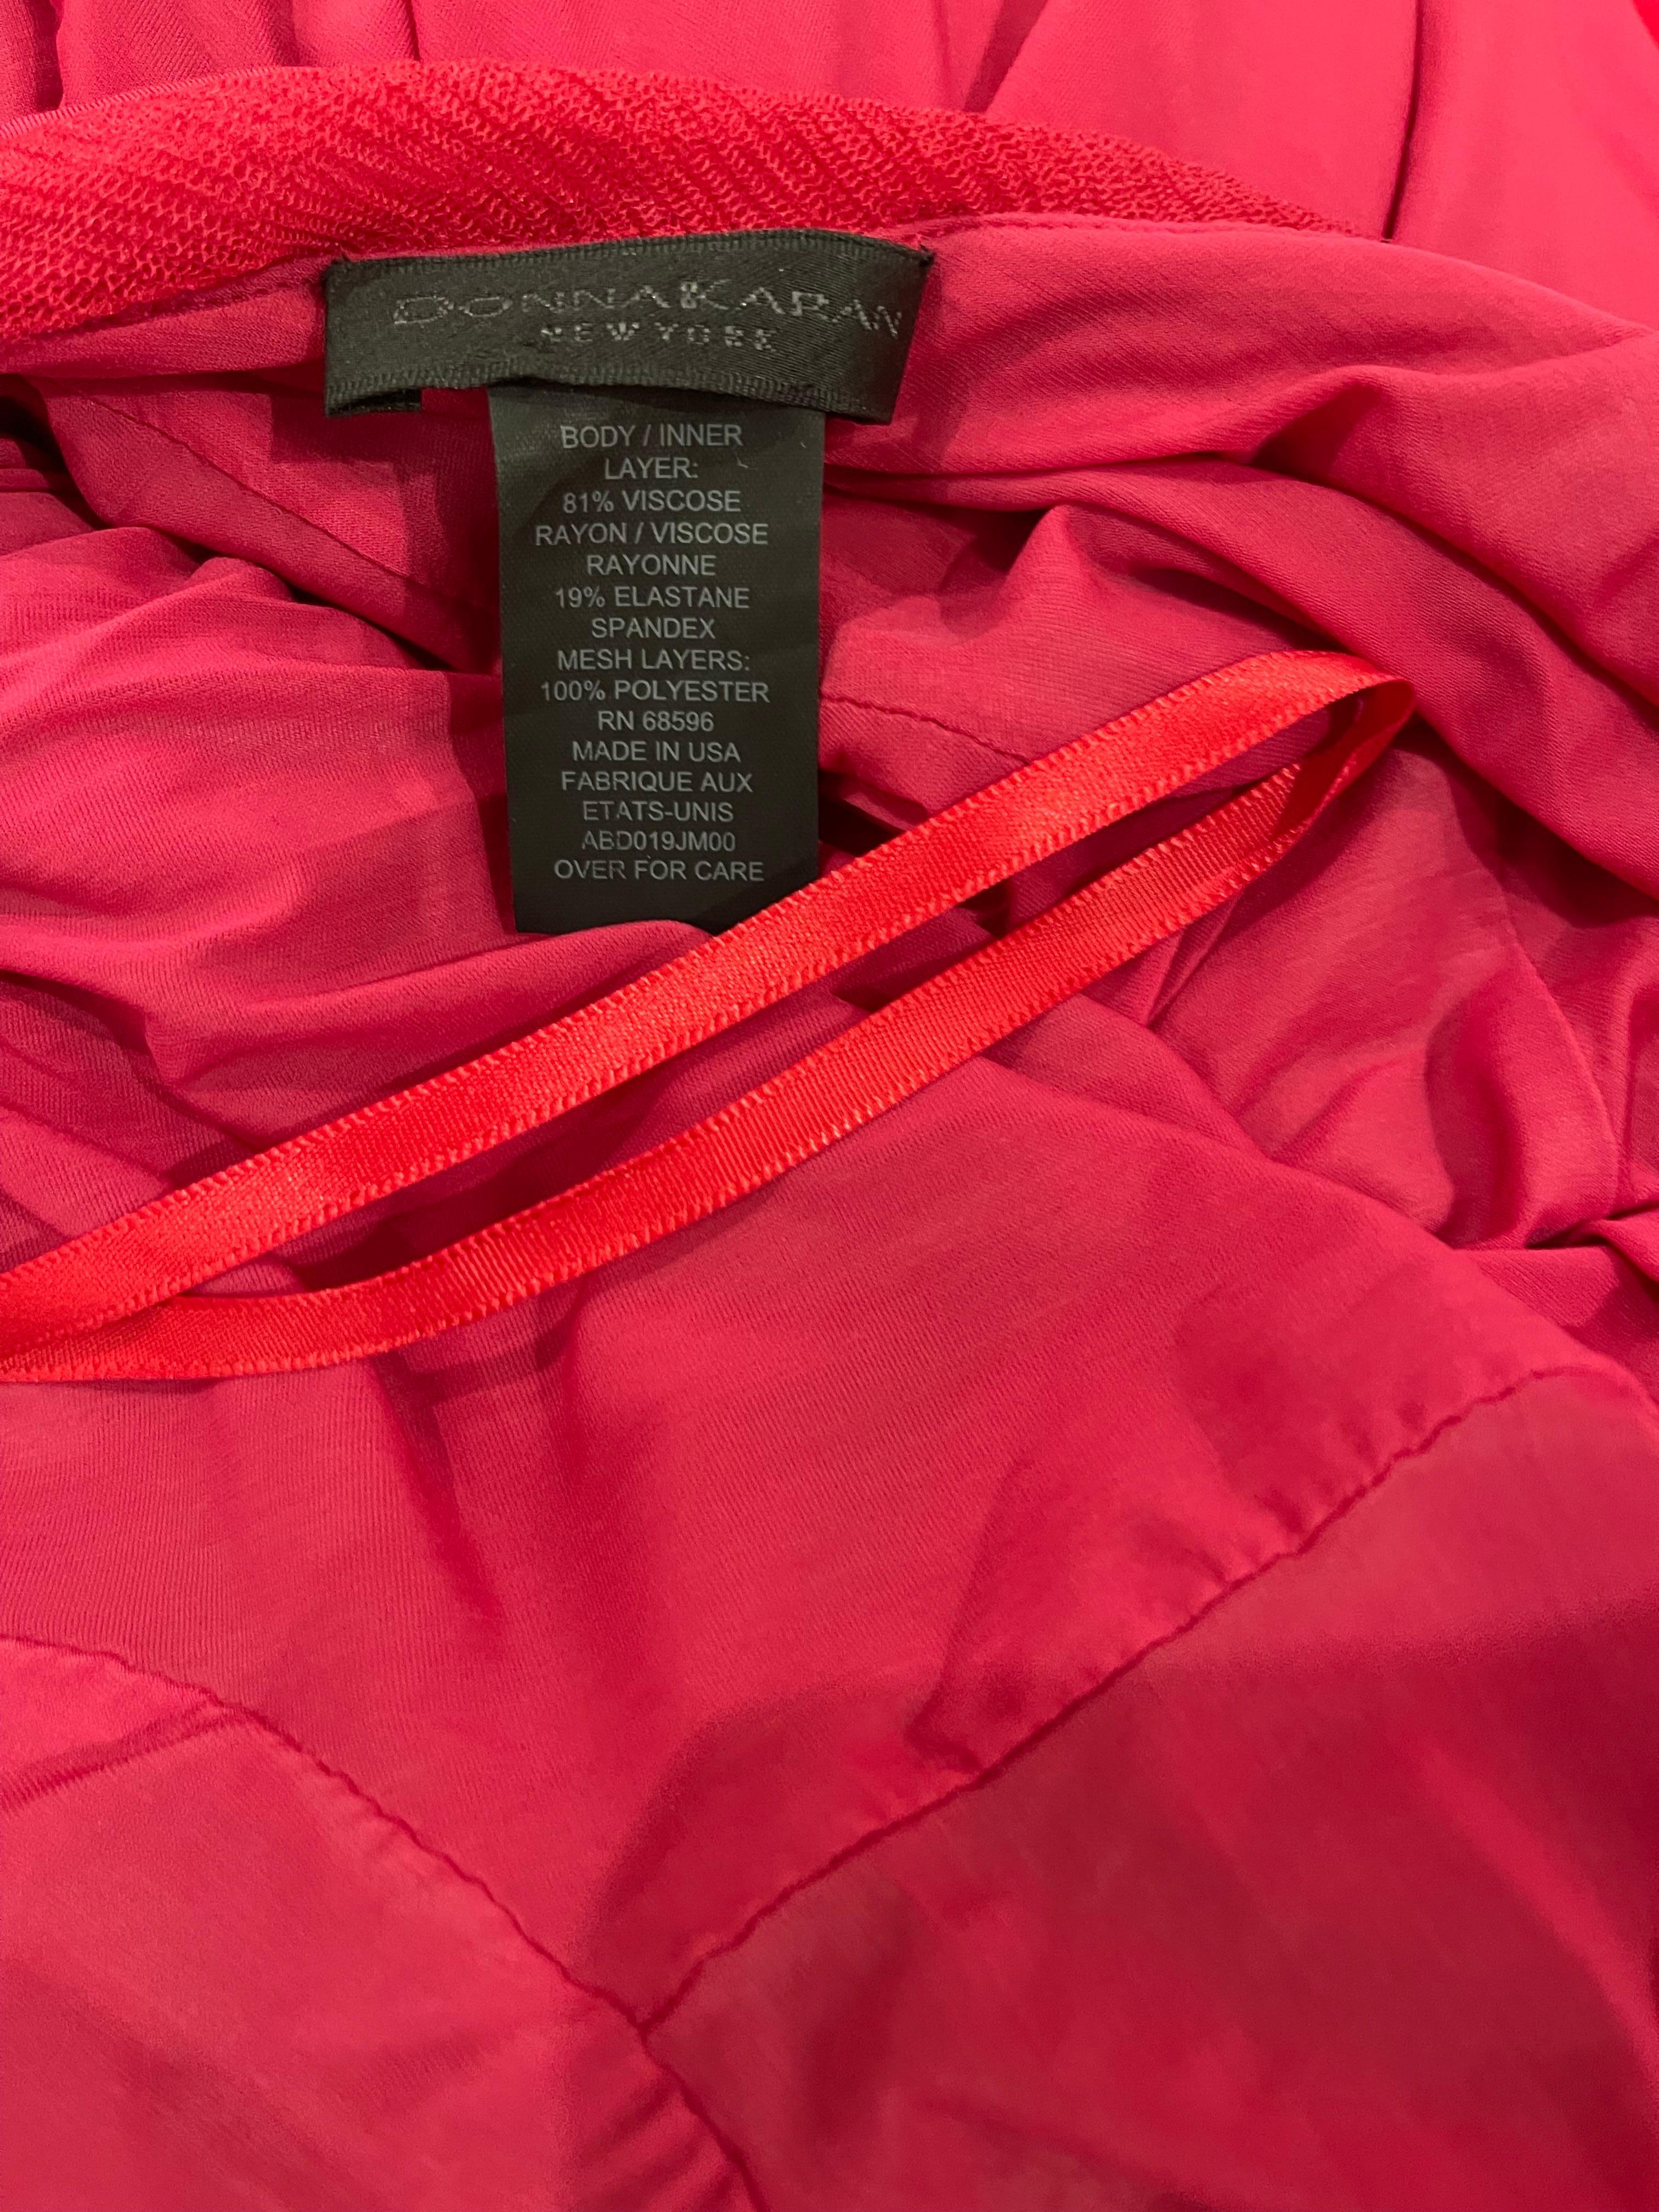 Donna Karan Runway Fall 2004 Hot Pink Off Shoulder Vintage Jersey Tulle Dress In Excellent Condition For Sale In San Diego, CA